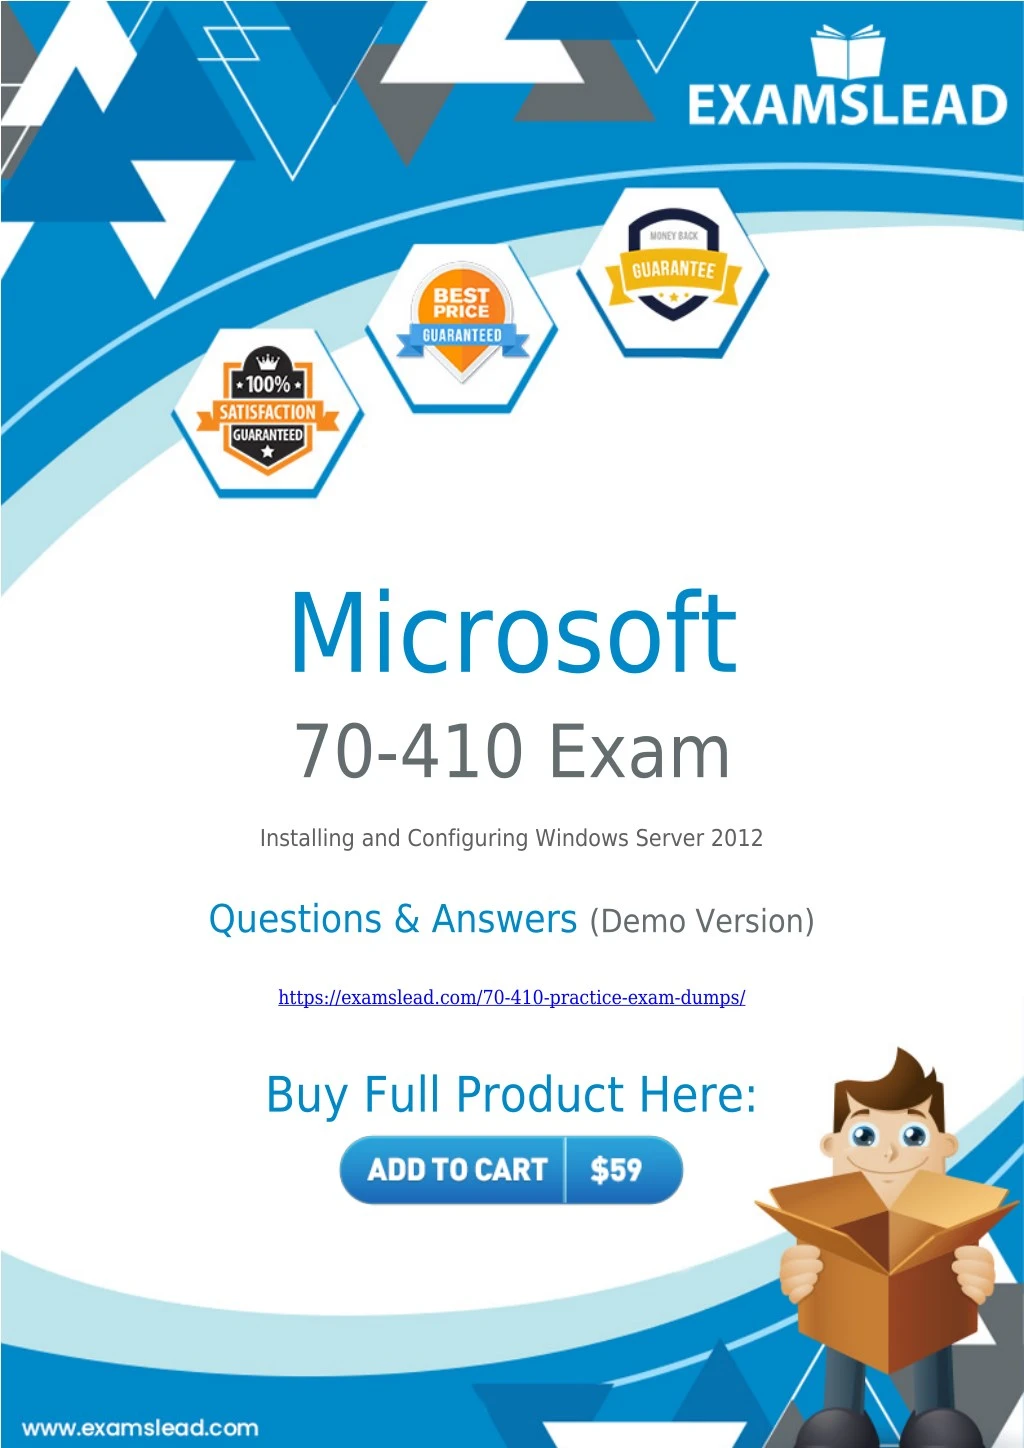 Ppt 70 410 Exam Dumps Prepare Your Exam With Actual 70 410 Exam Questions Pdf Powerpoint Presentation Id